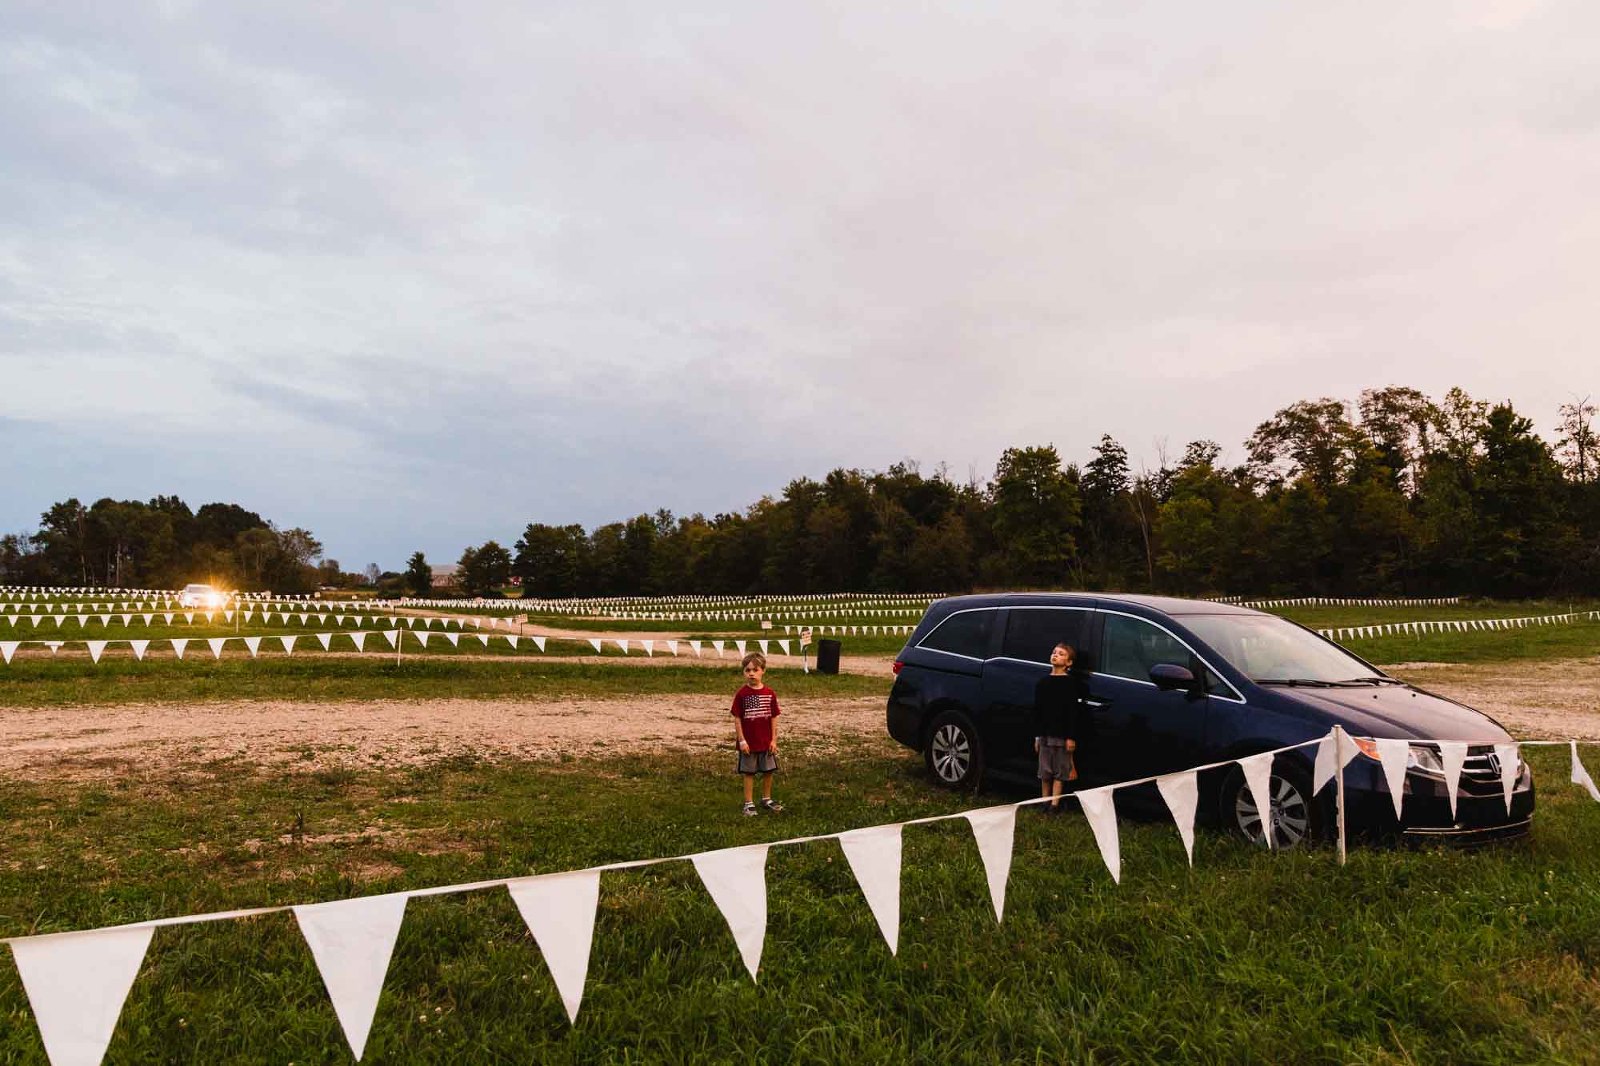 lone car sits in a giant makeshift field parking lot at sunset, with two boys lounging